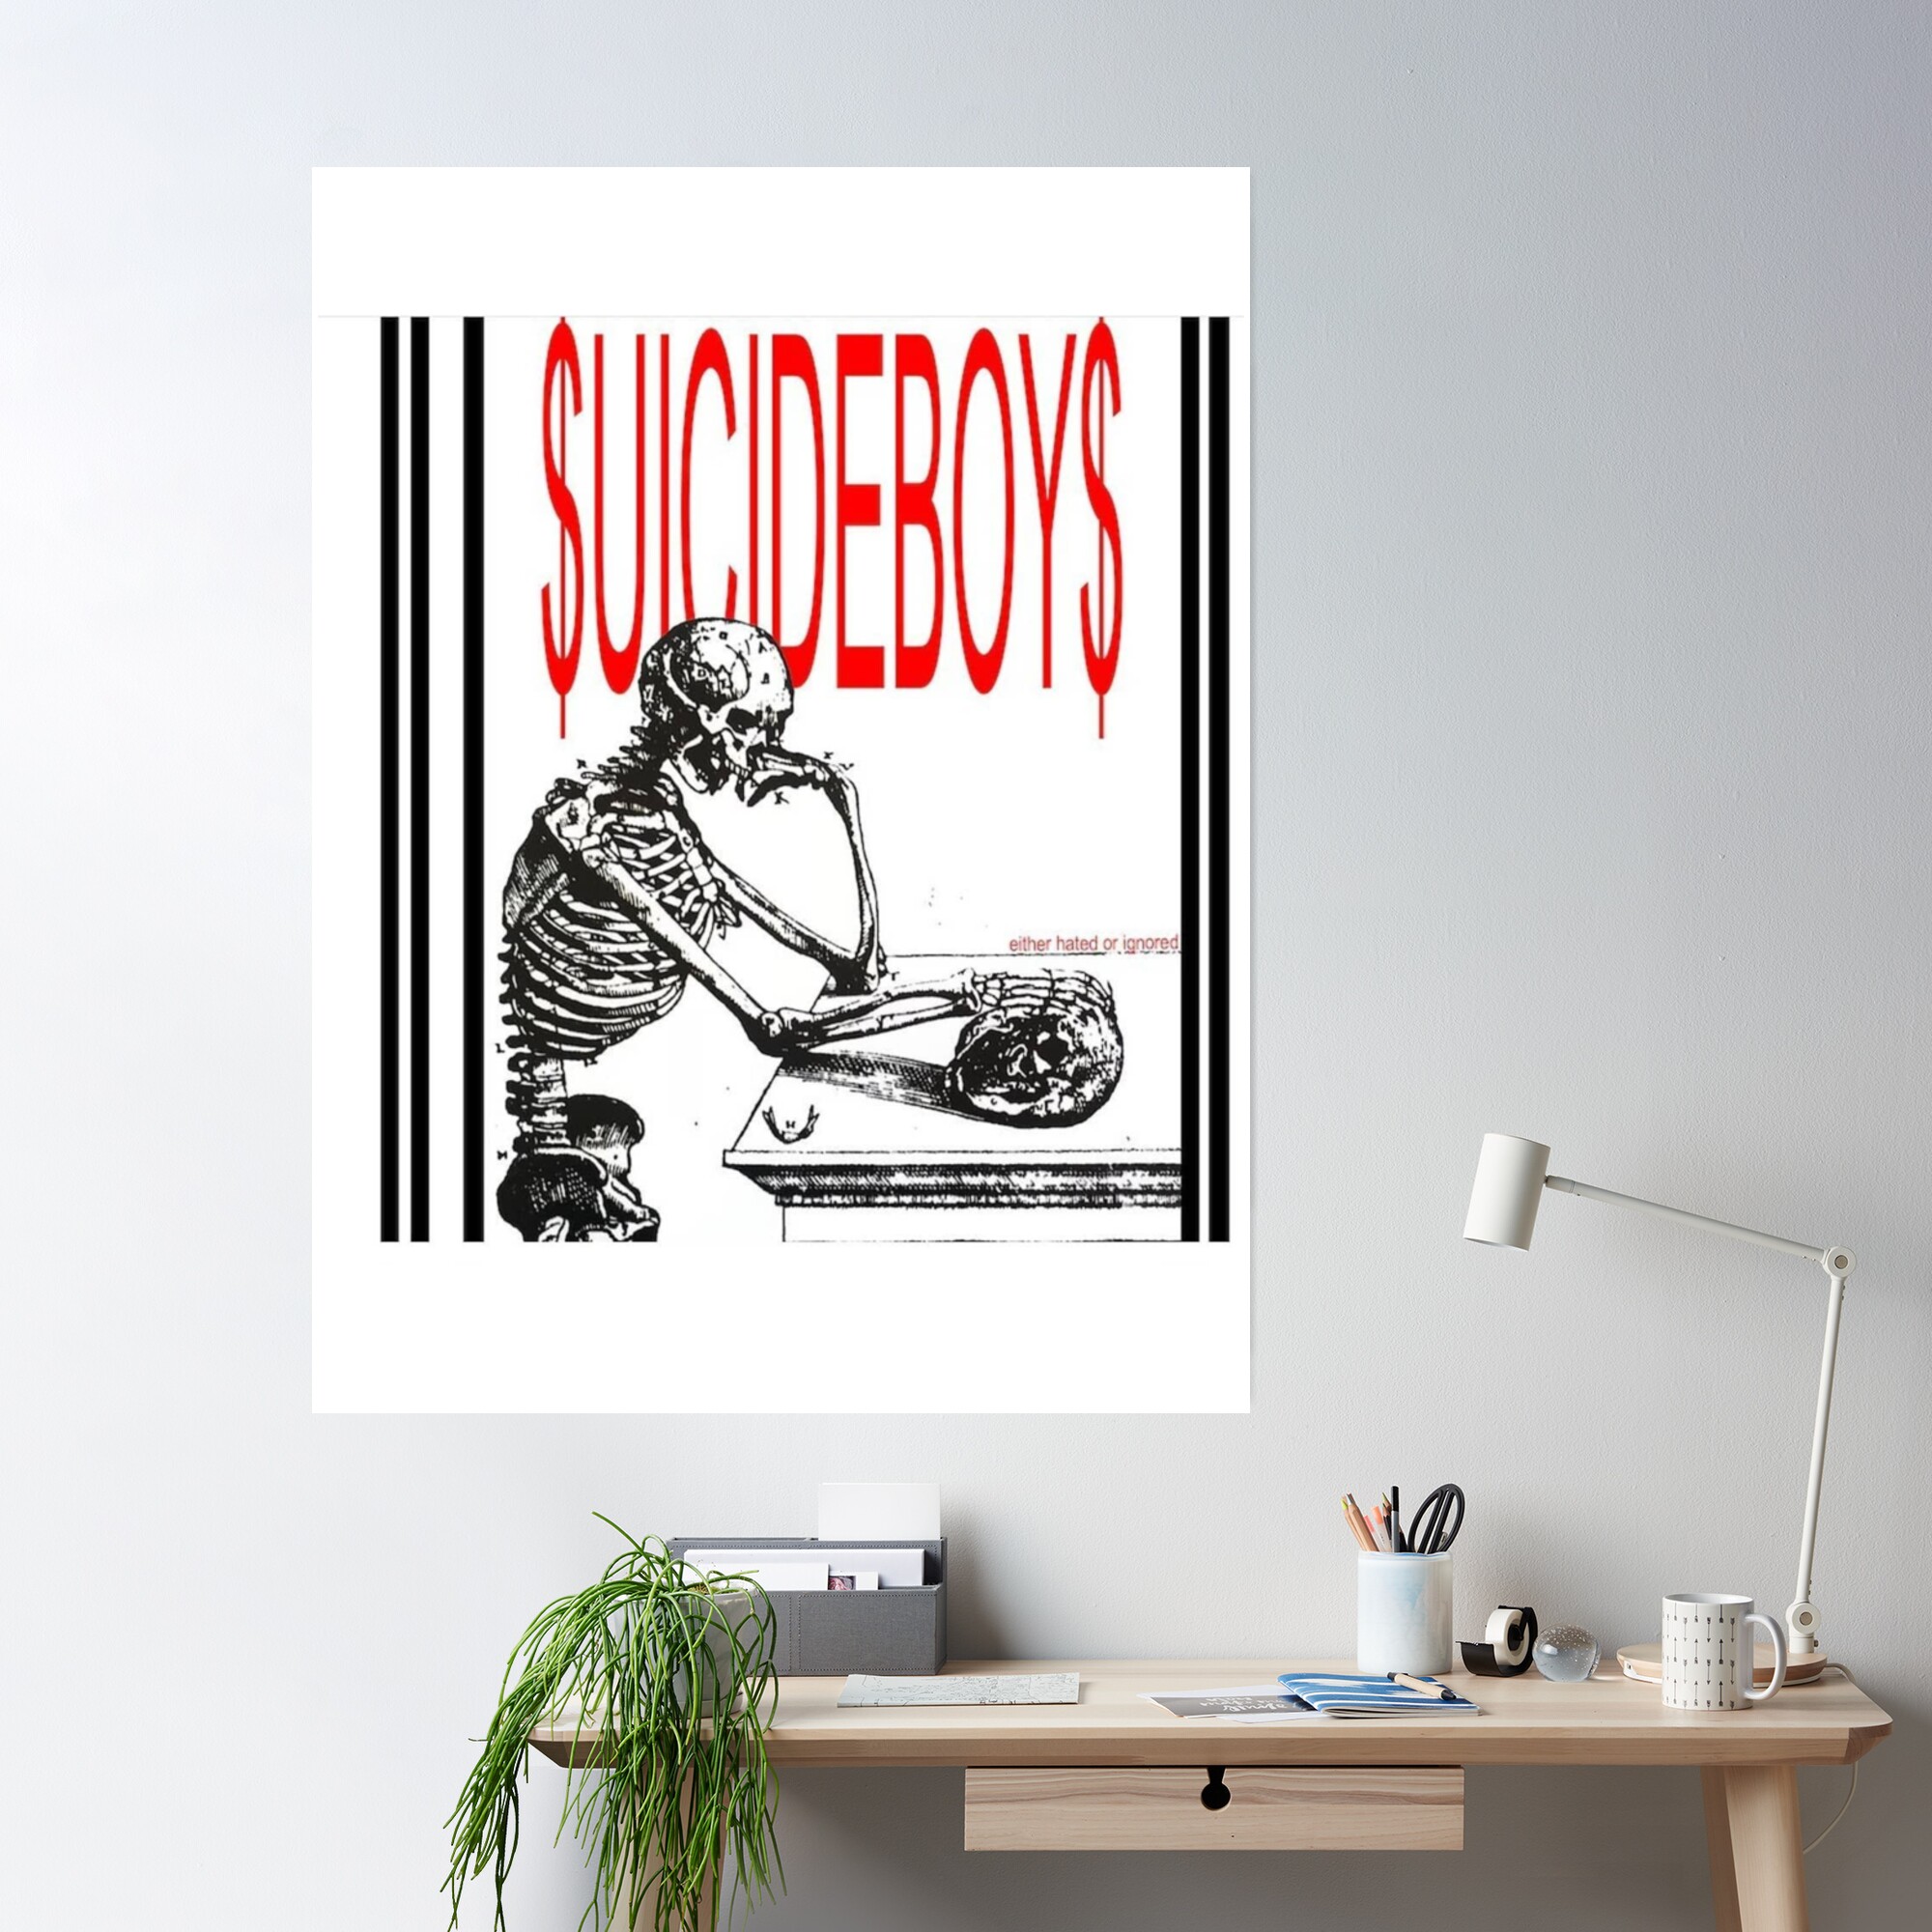 cposterlargesquare product2000x2000 11 - Suicideboys Shop